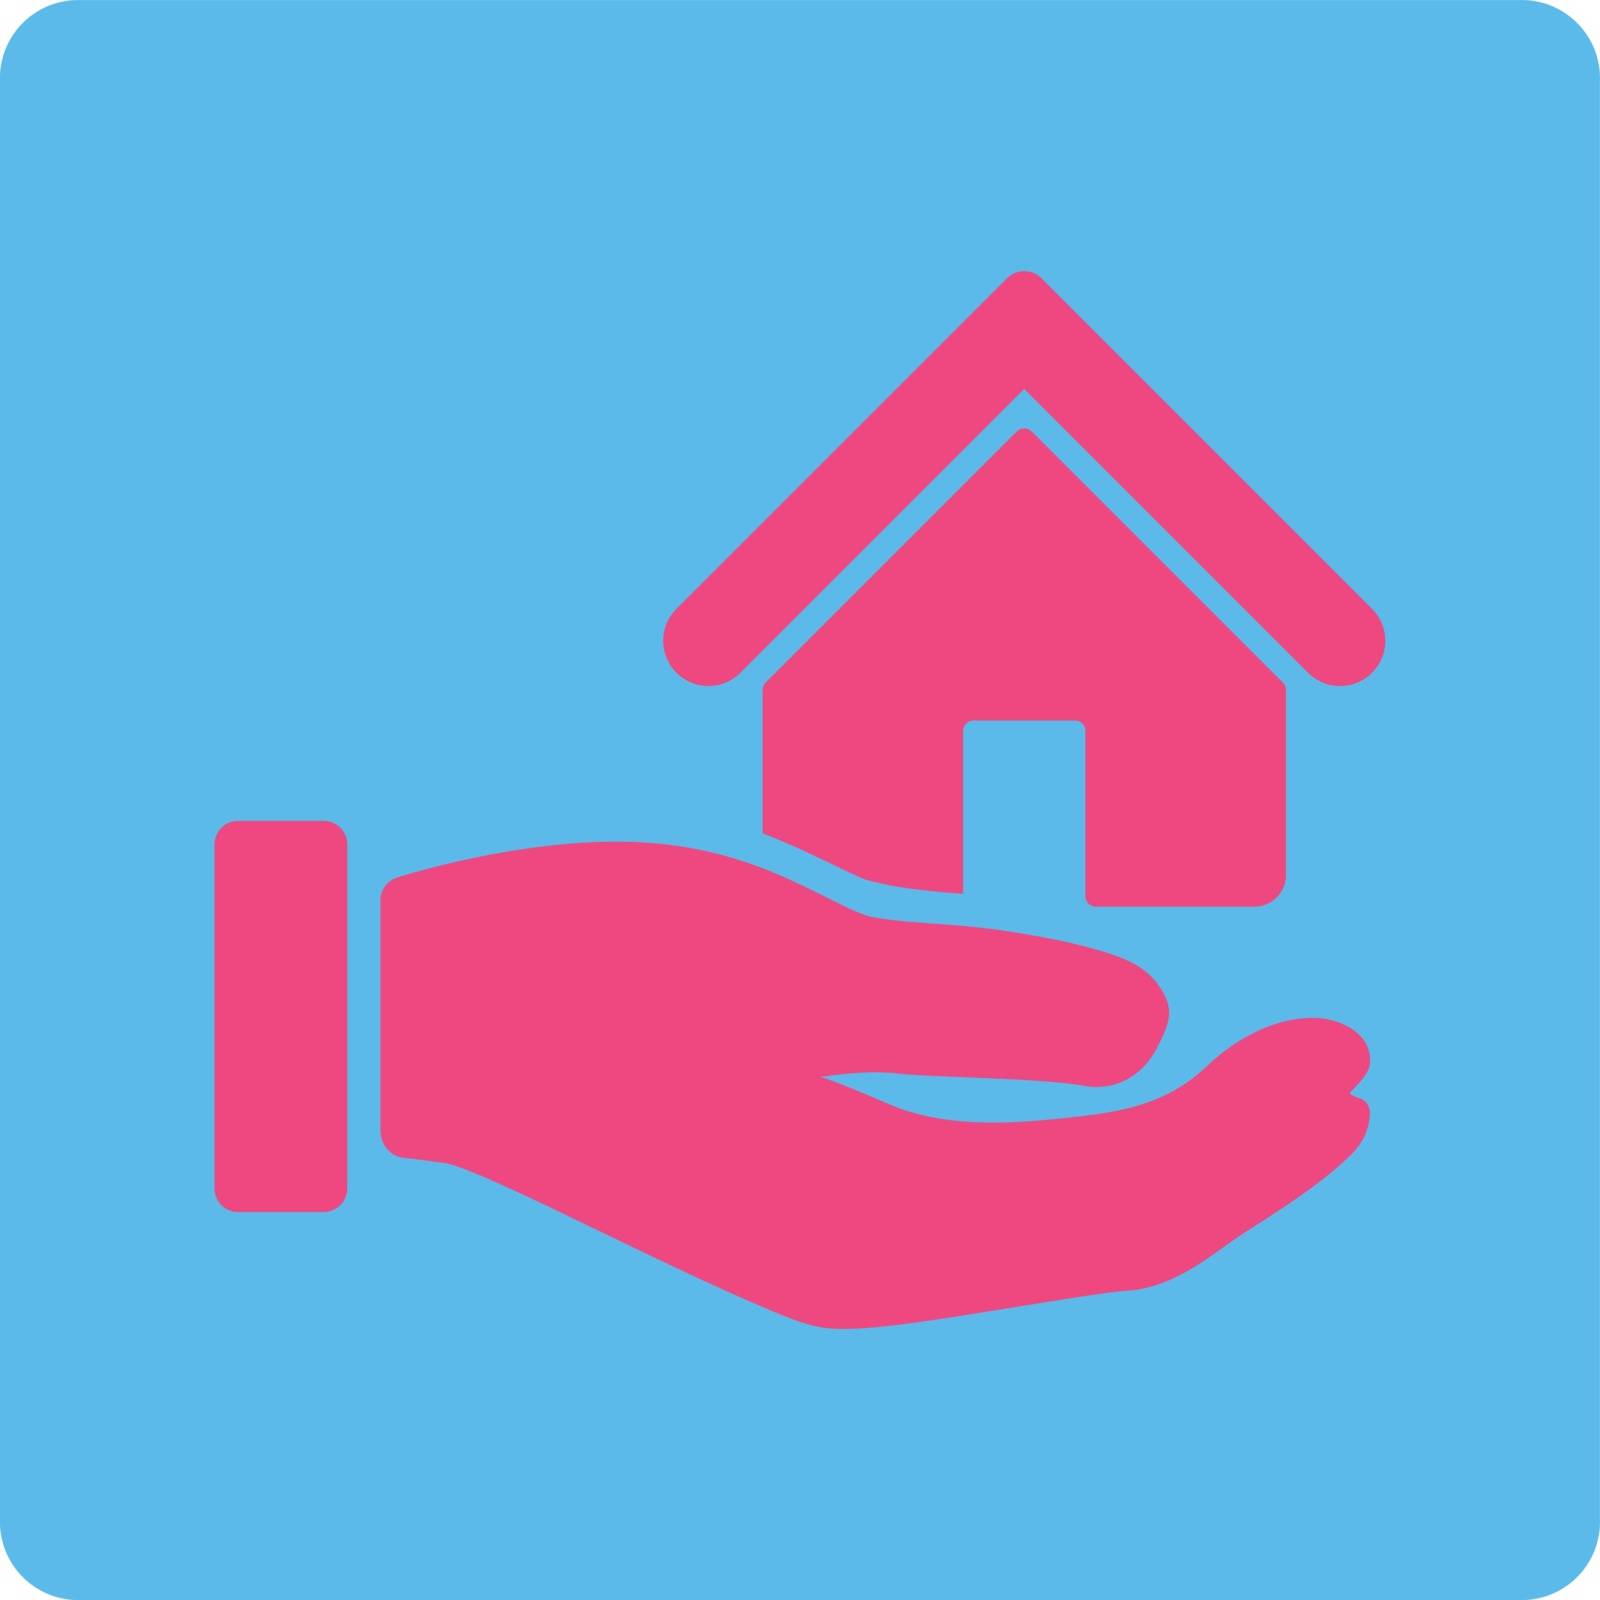 Real Estate vector icon. This flat rounded square button uses pink and blue colors and isolated on a white background.